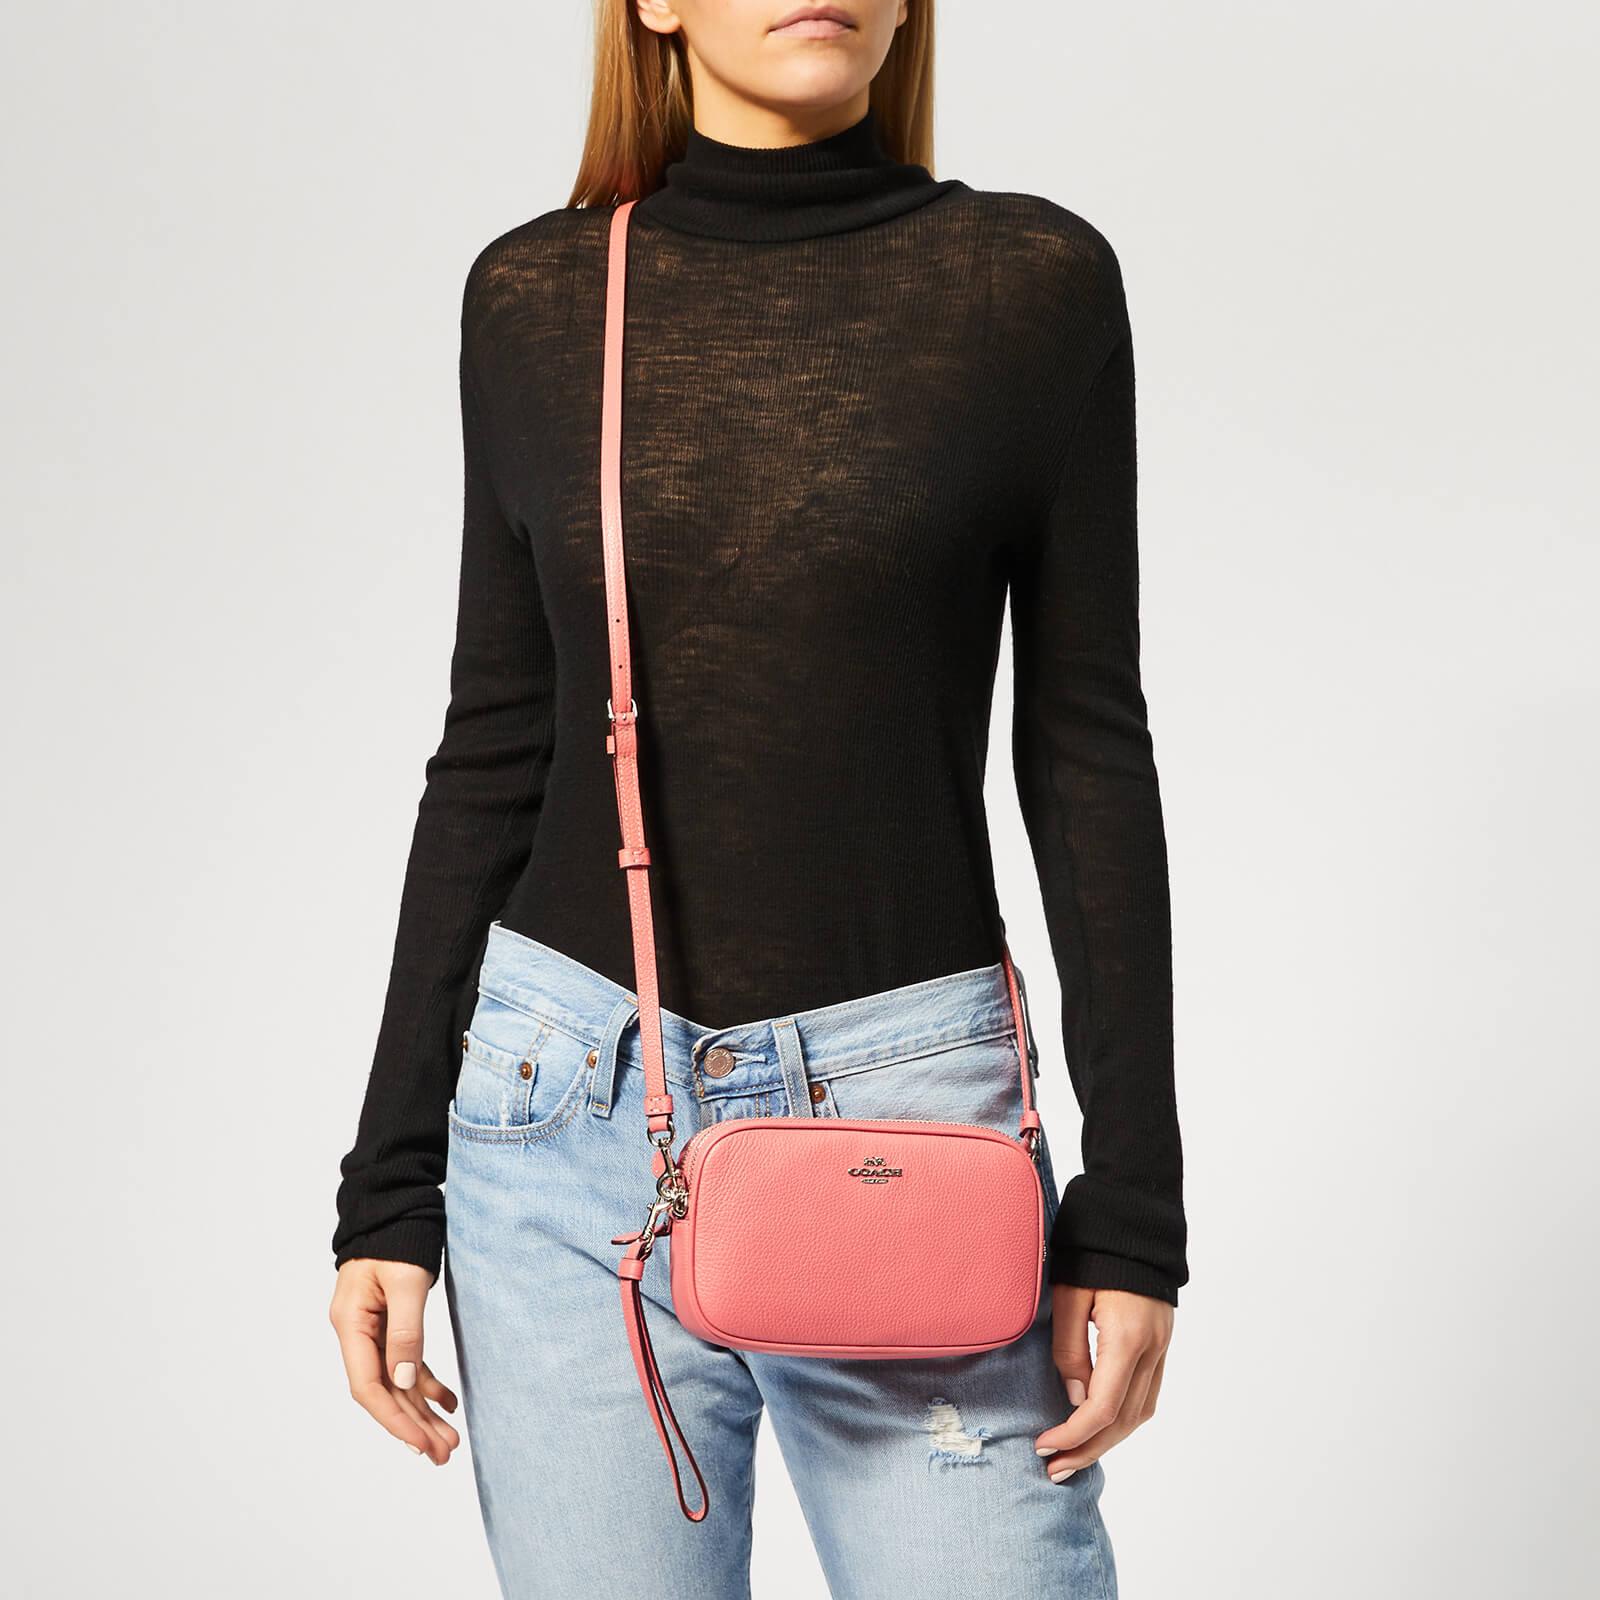 COACH Polished Pebble Cross Body Clutch Bag in Pink - Lyst